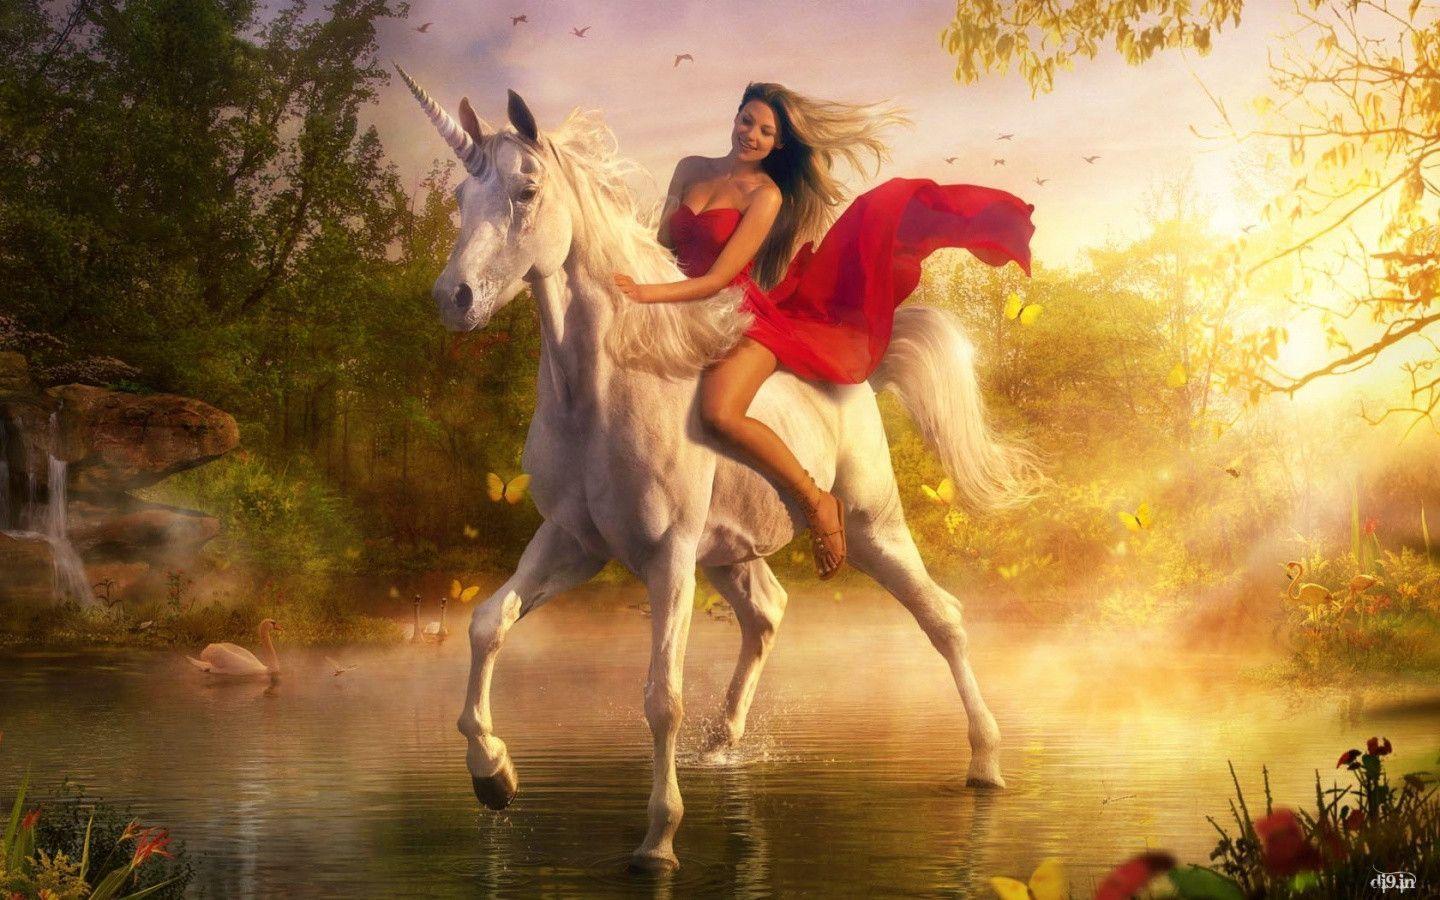 celebrity on fantasy horse Wallpaper and stock image